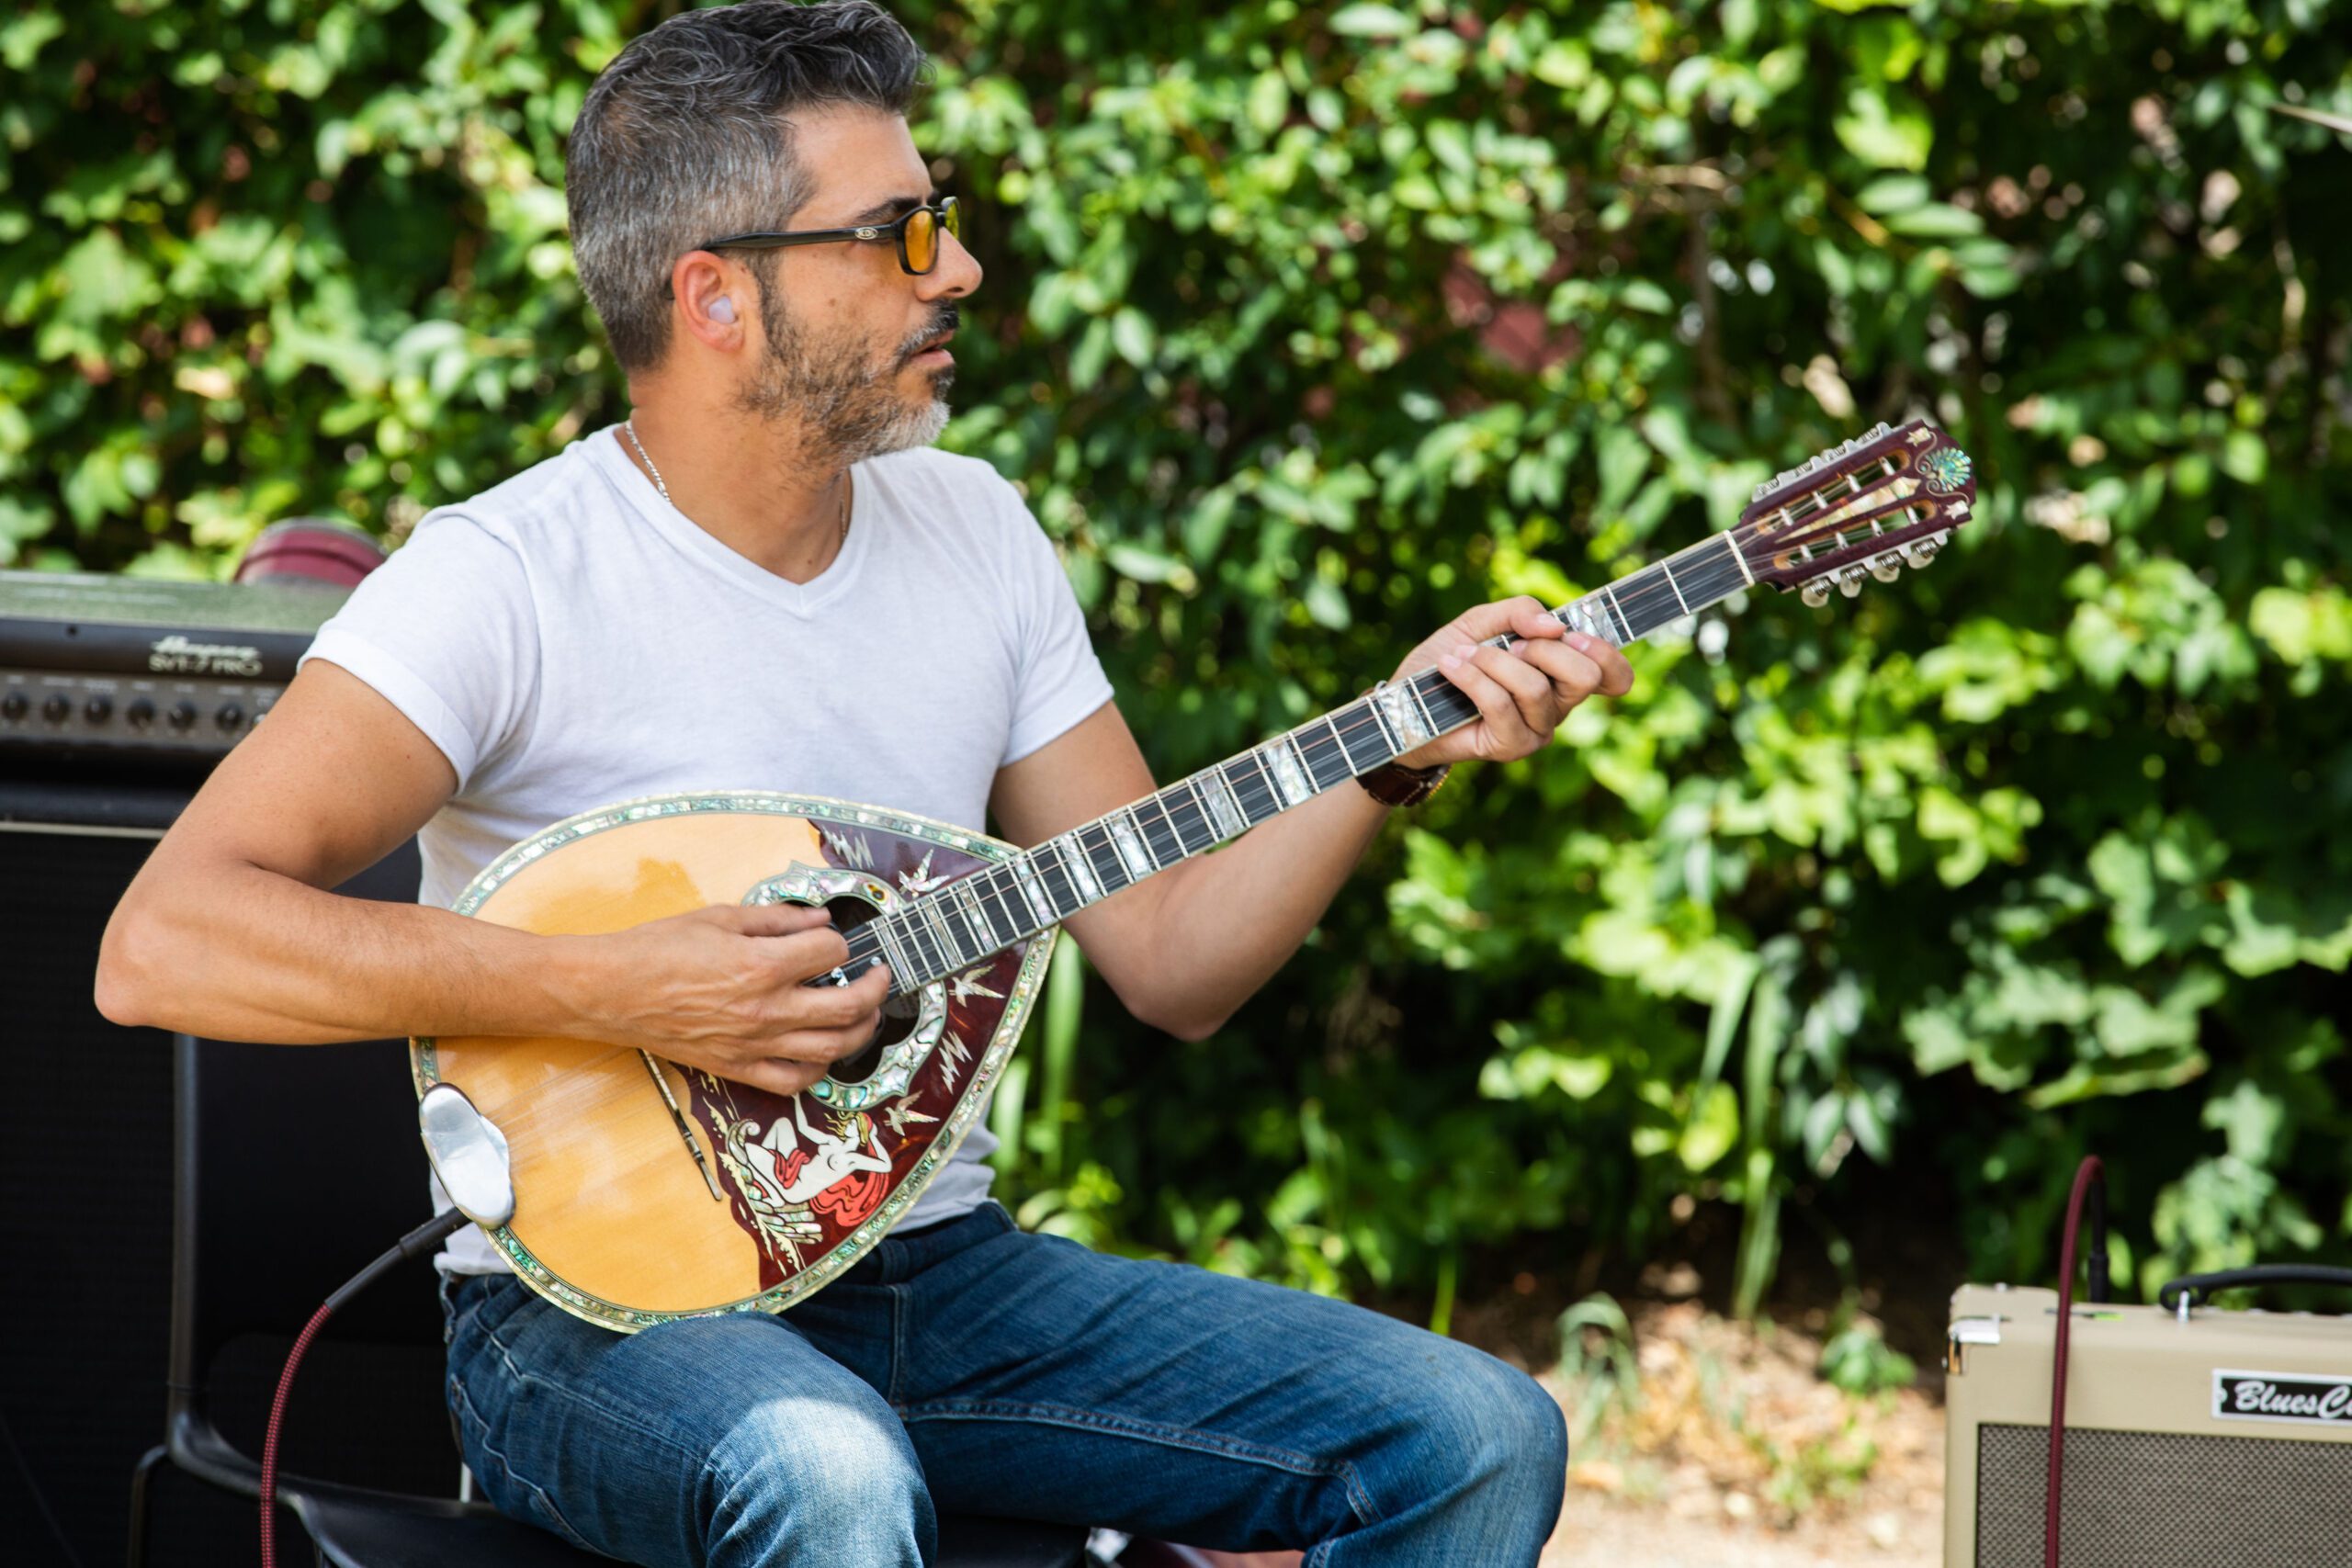 a man playing an acoustic guitar in a park.